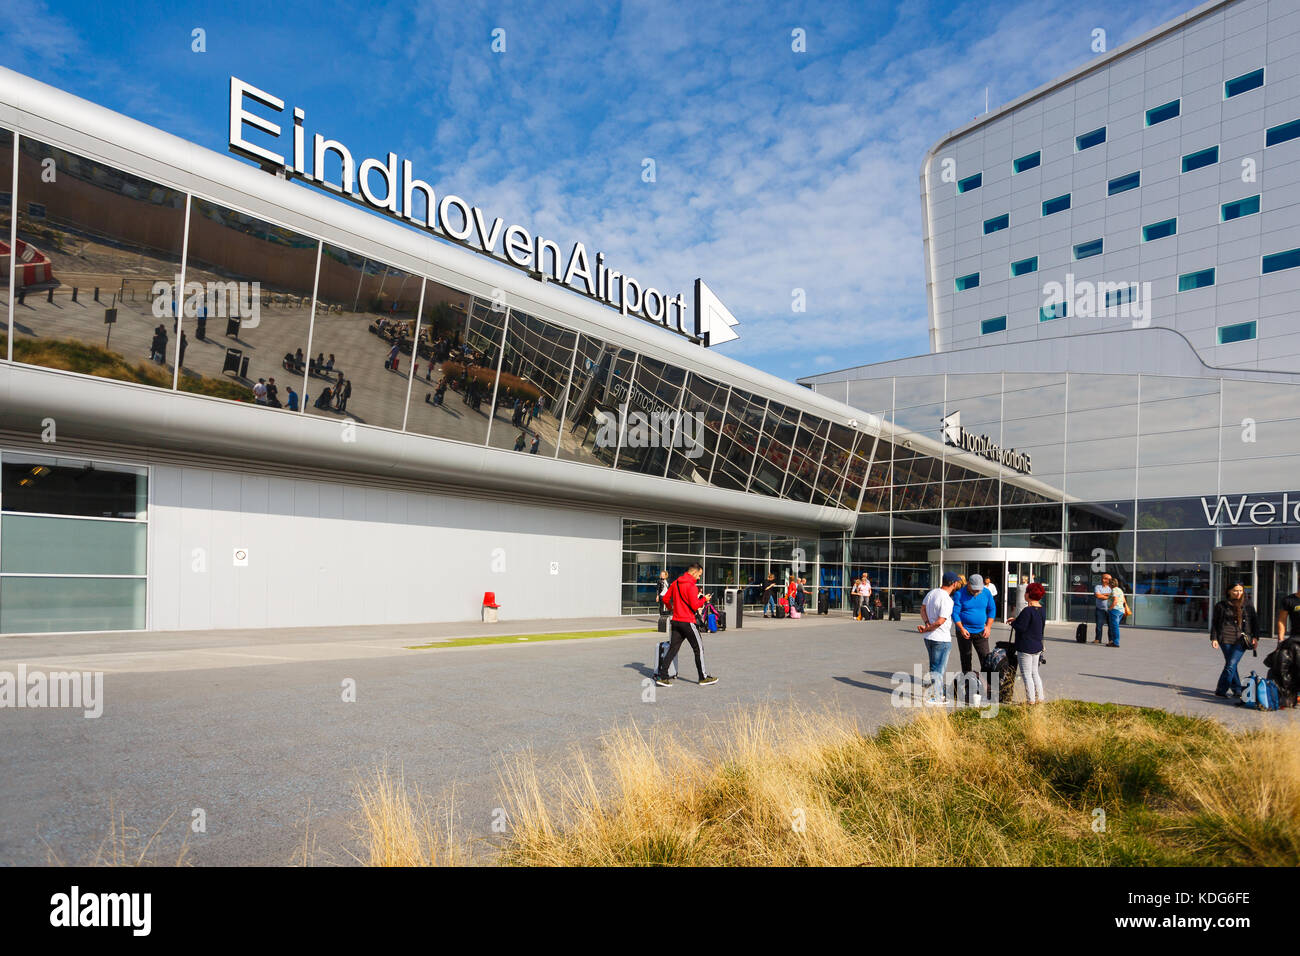 Eindhoven Airport High Resolution Stock Photography and Images - Alamy